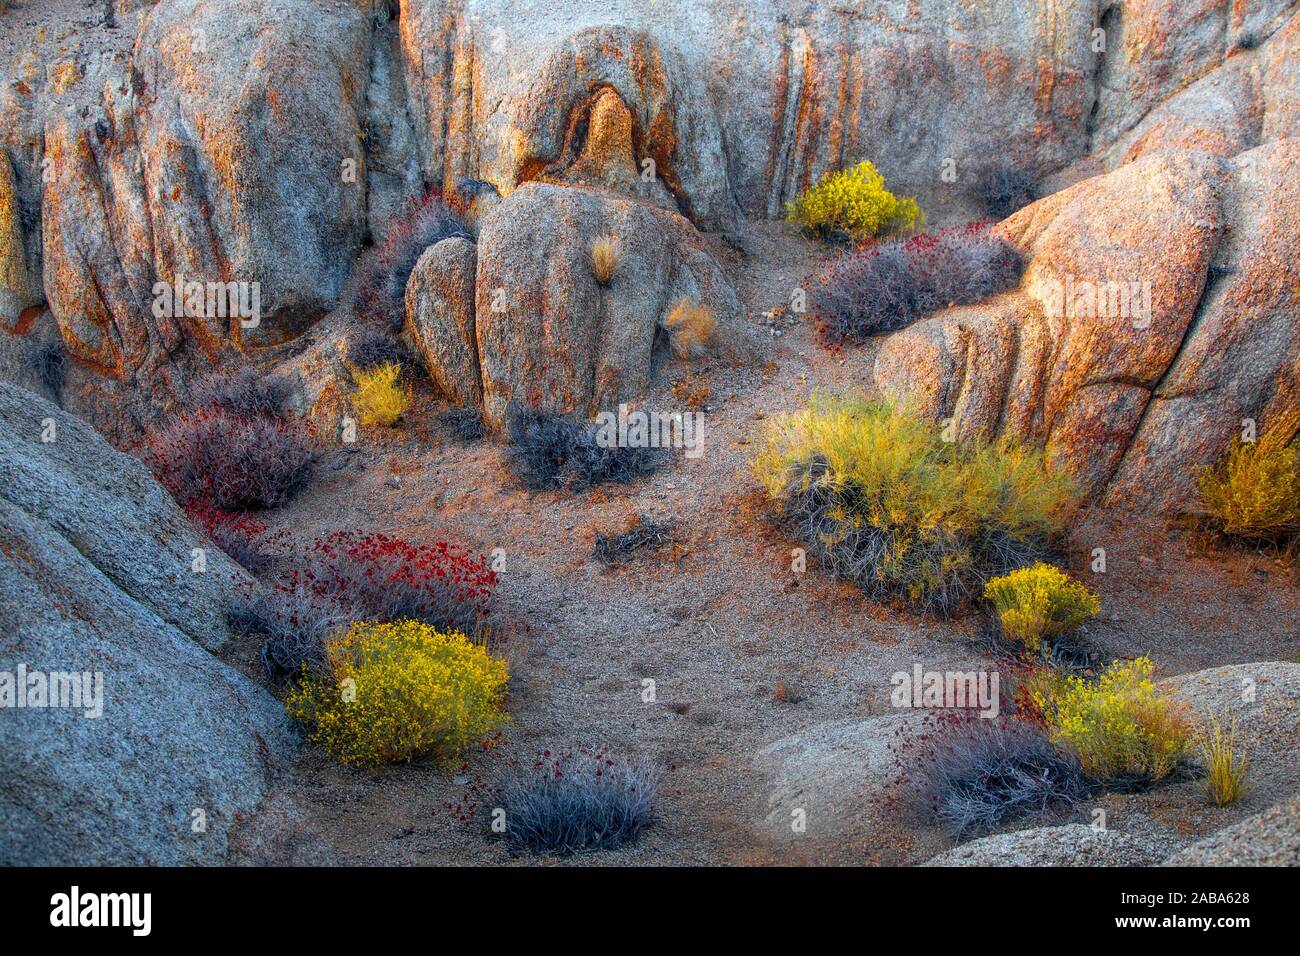 The Alabama Hills are situated at the base of the Sierra Nevada Mountains near Lone Pine, California. Stock Photo